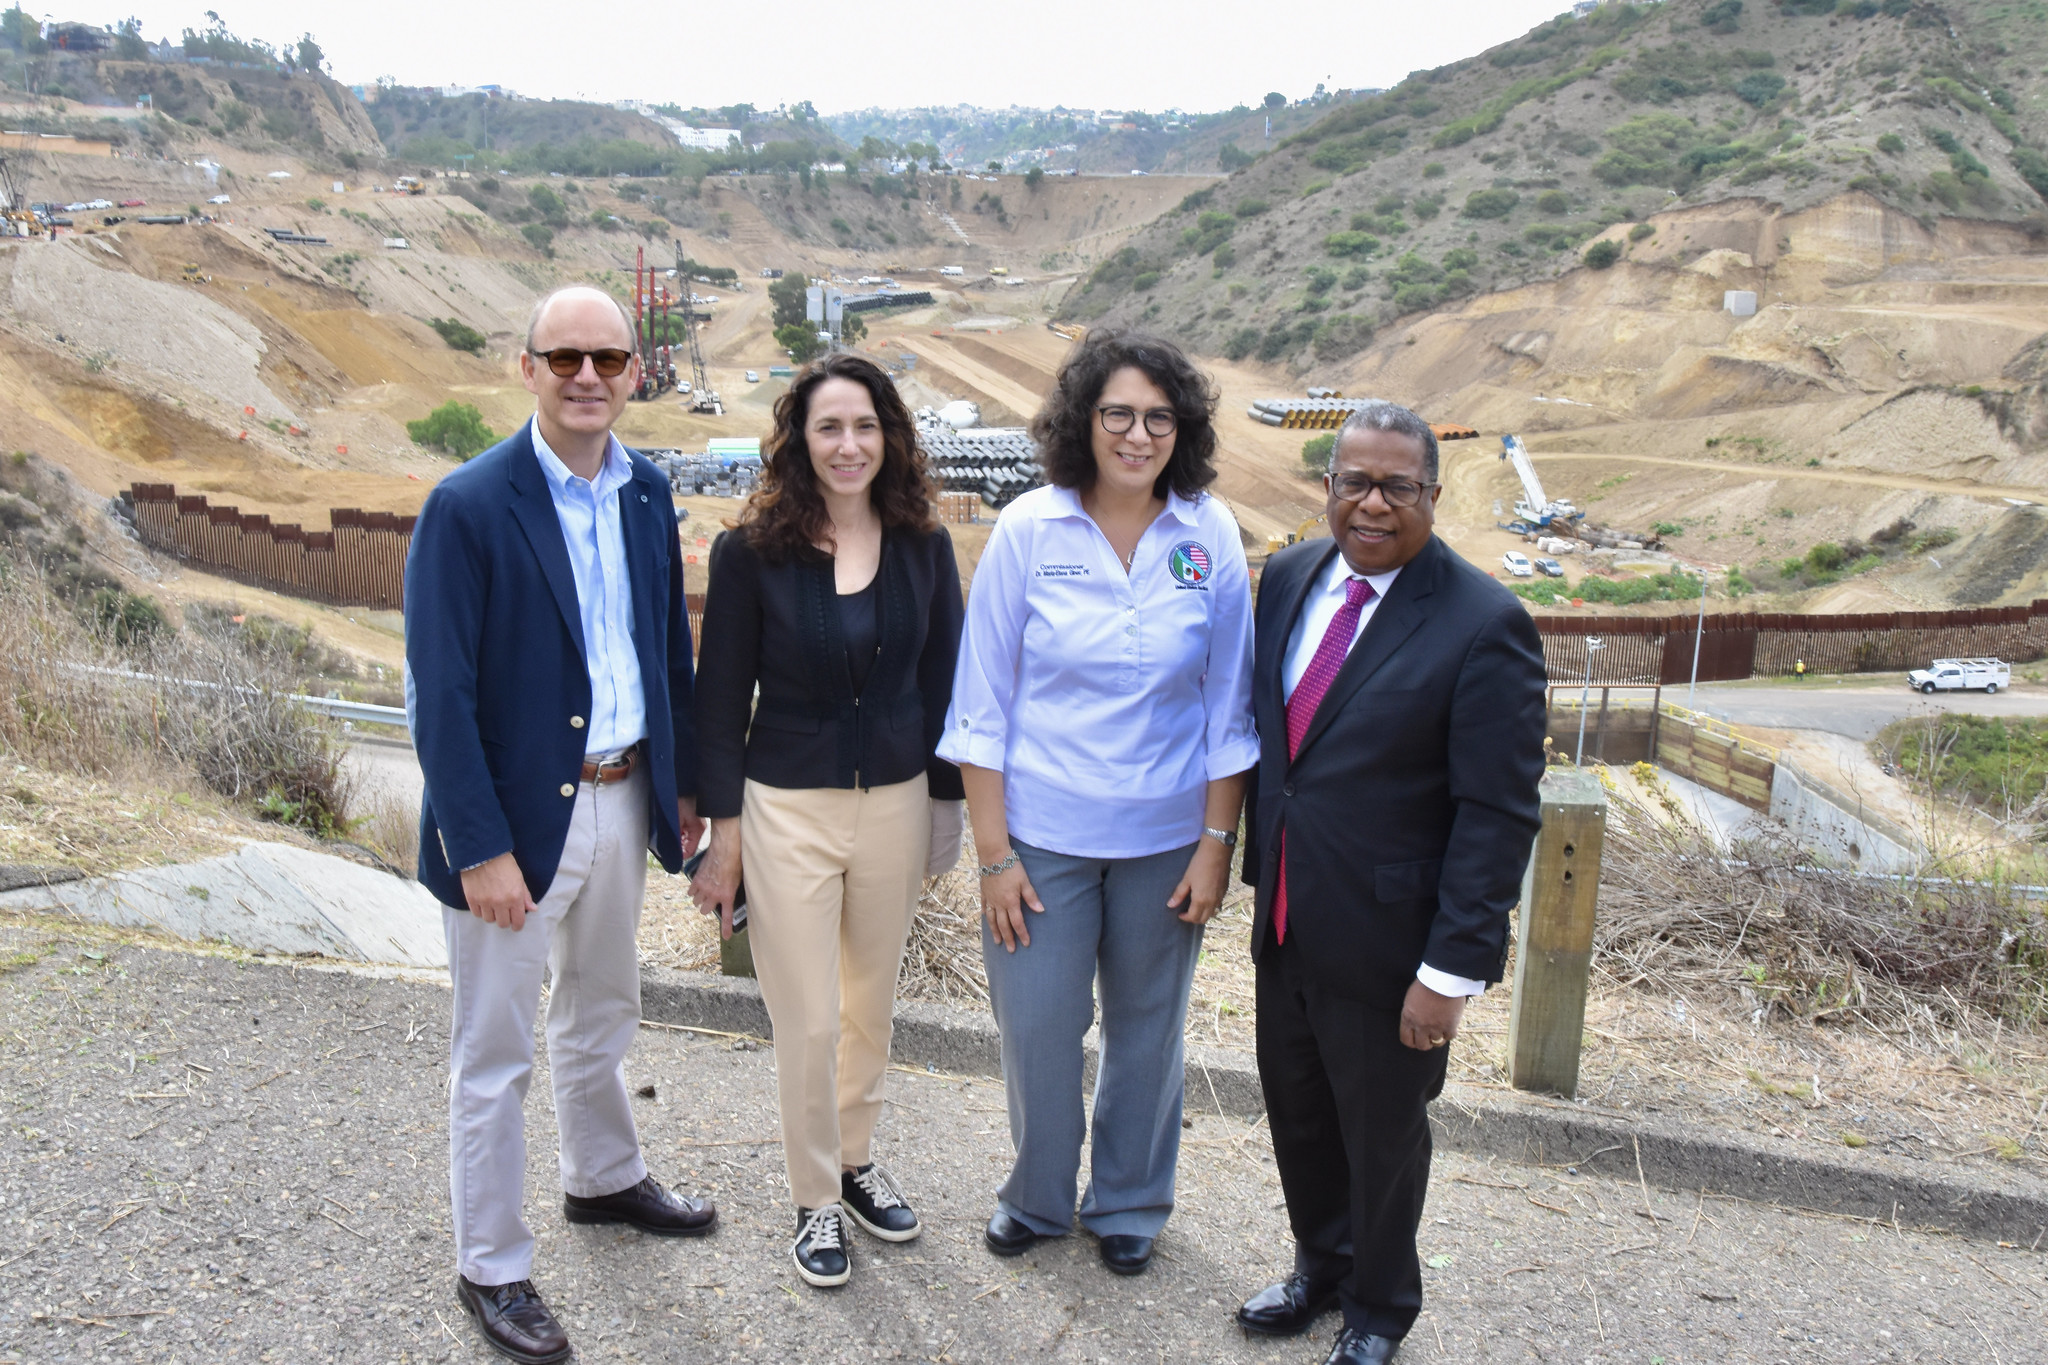 Nichols continues visit to Mexico border amid dialogues on democracy and environment